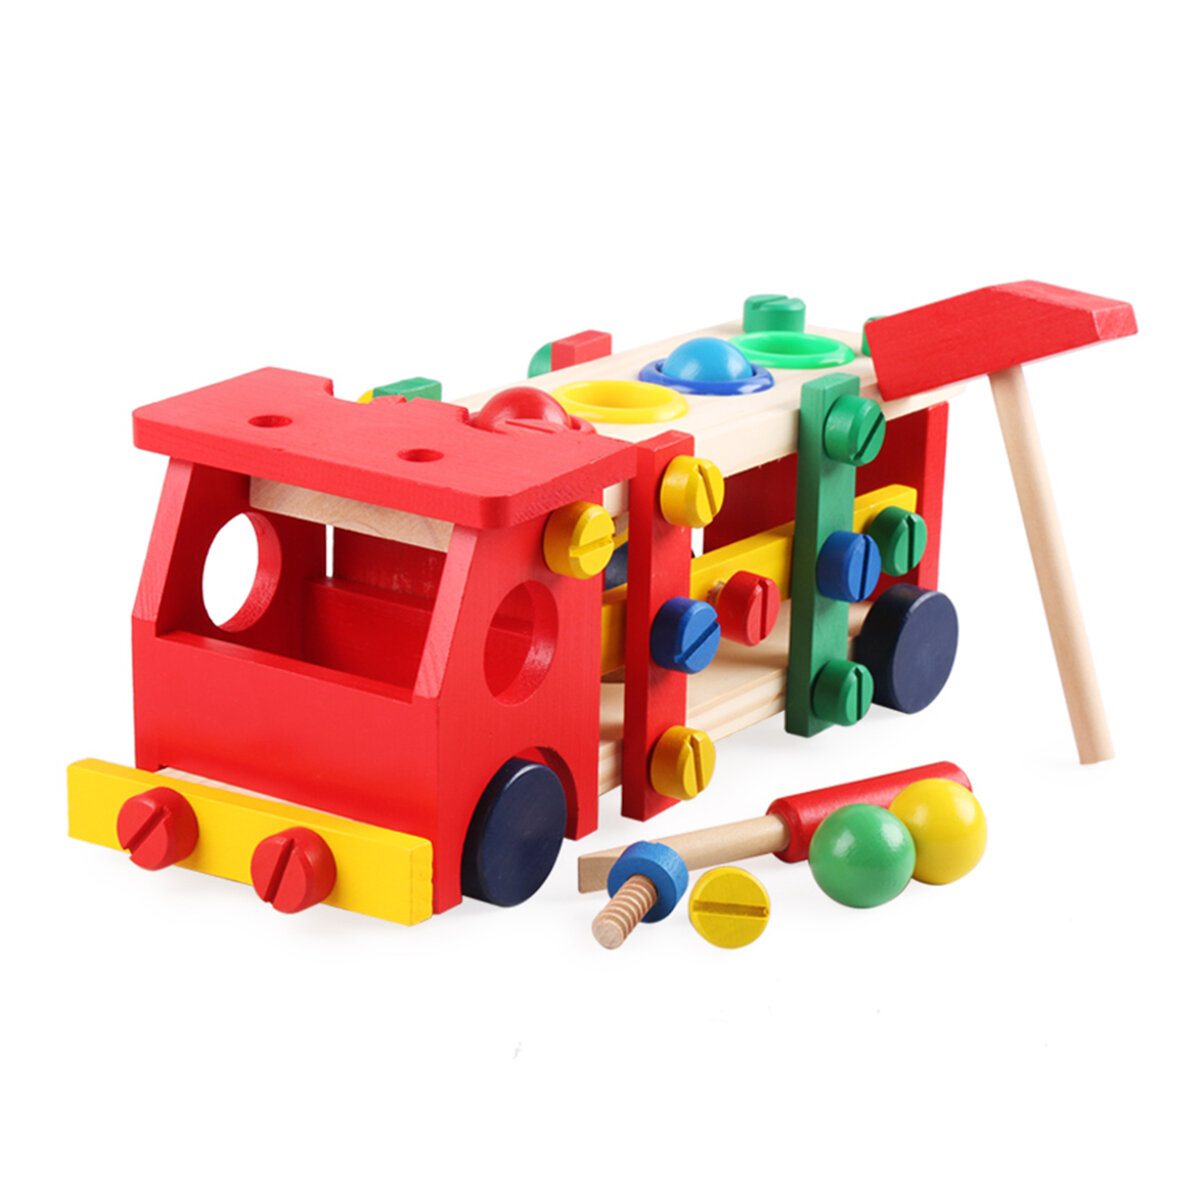 DIY Educational Toys Kids Exercise Practical Wooden IQ Game Car Assemble Building Gift Training Brai